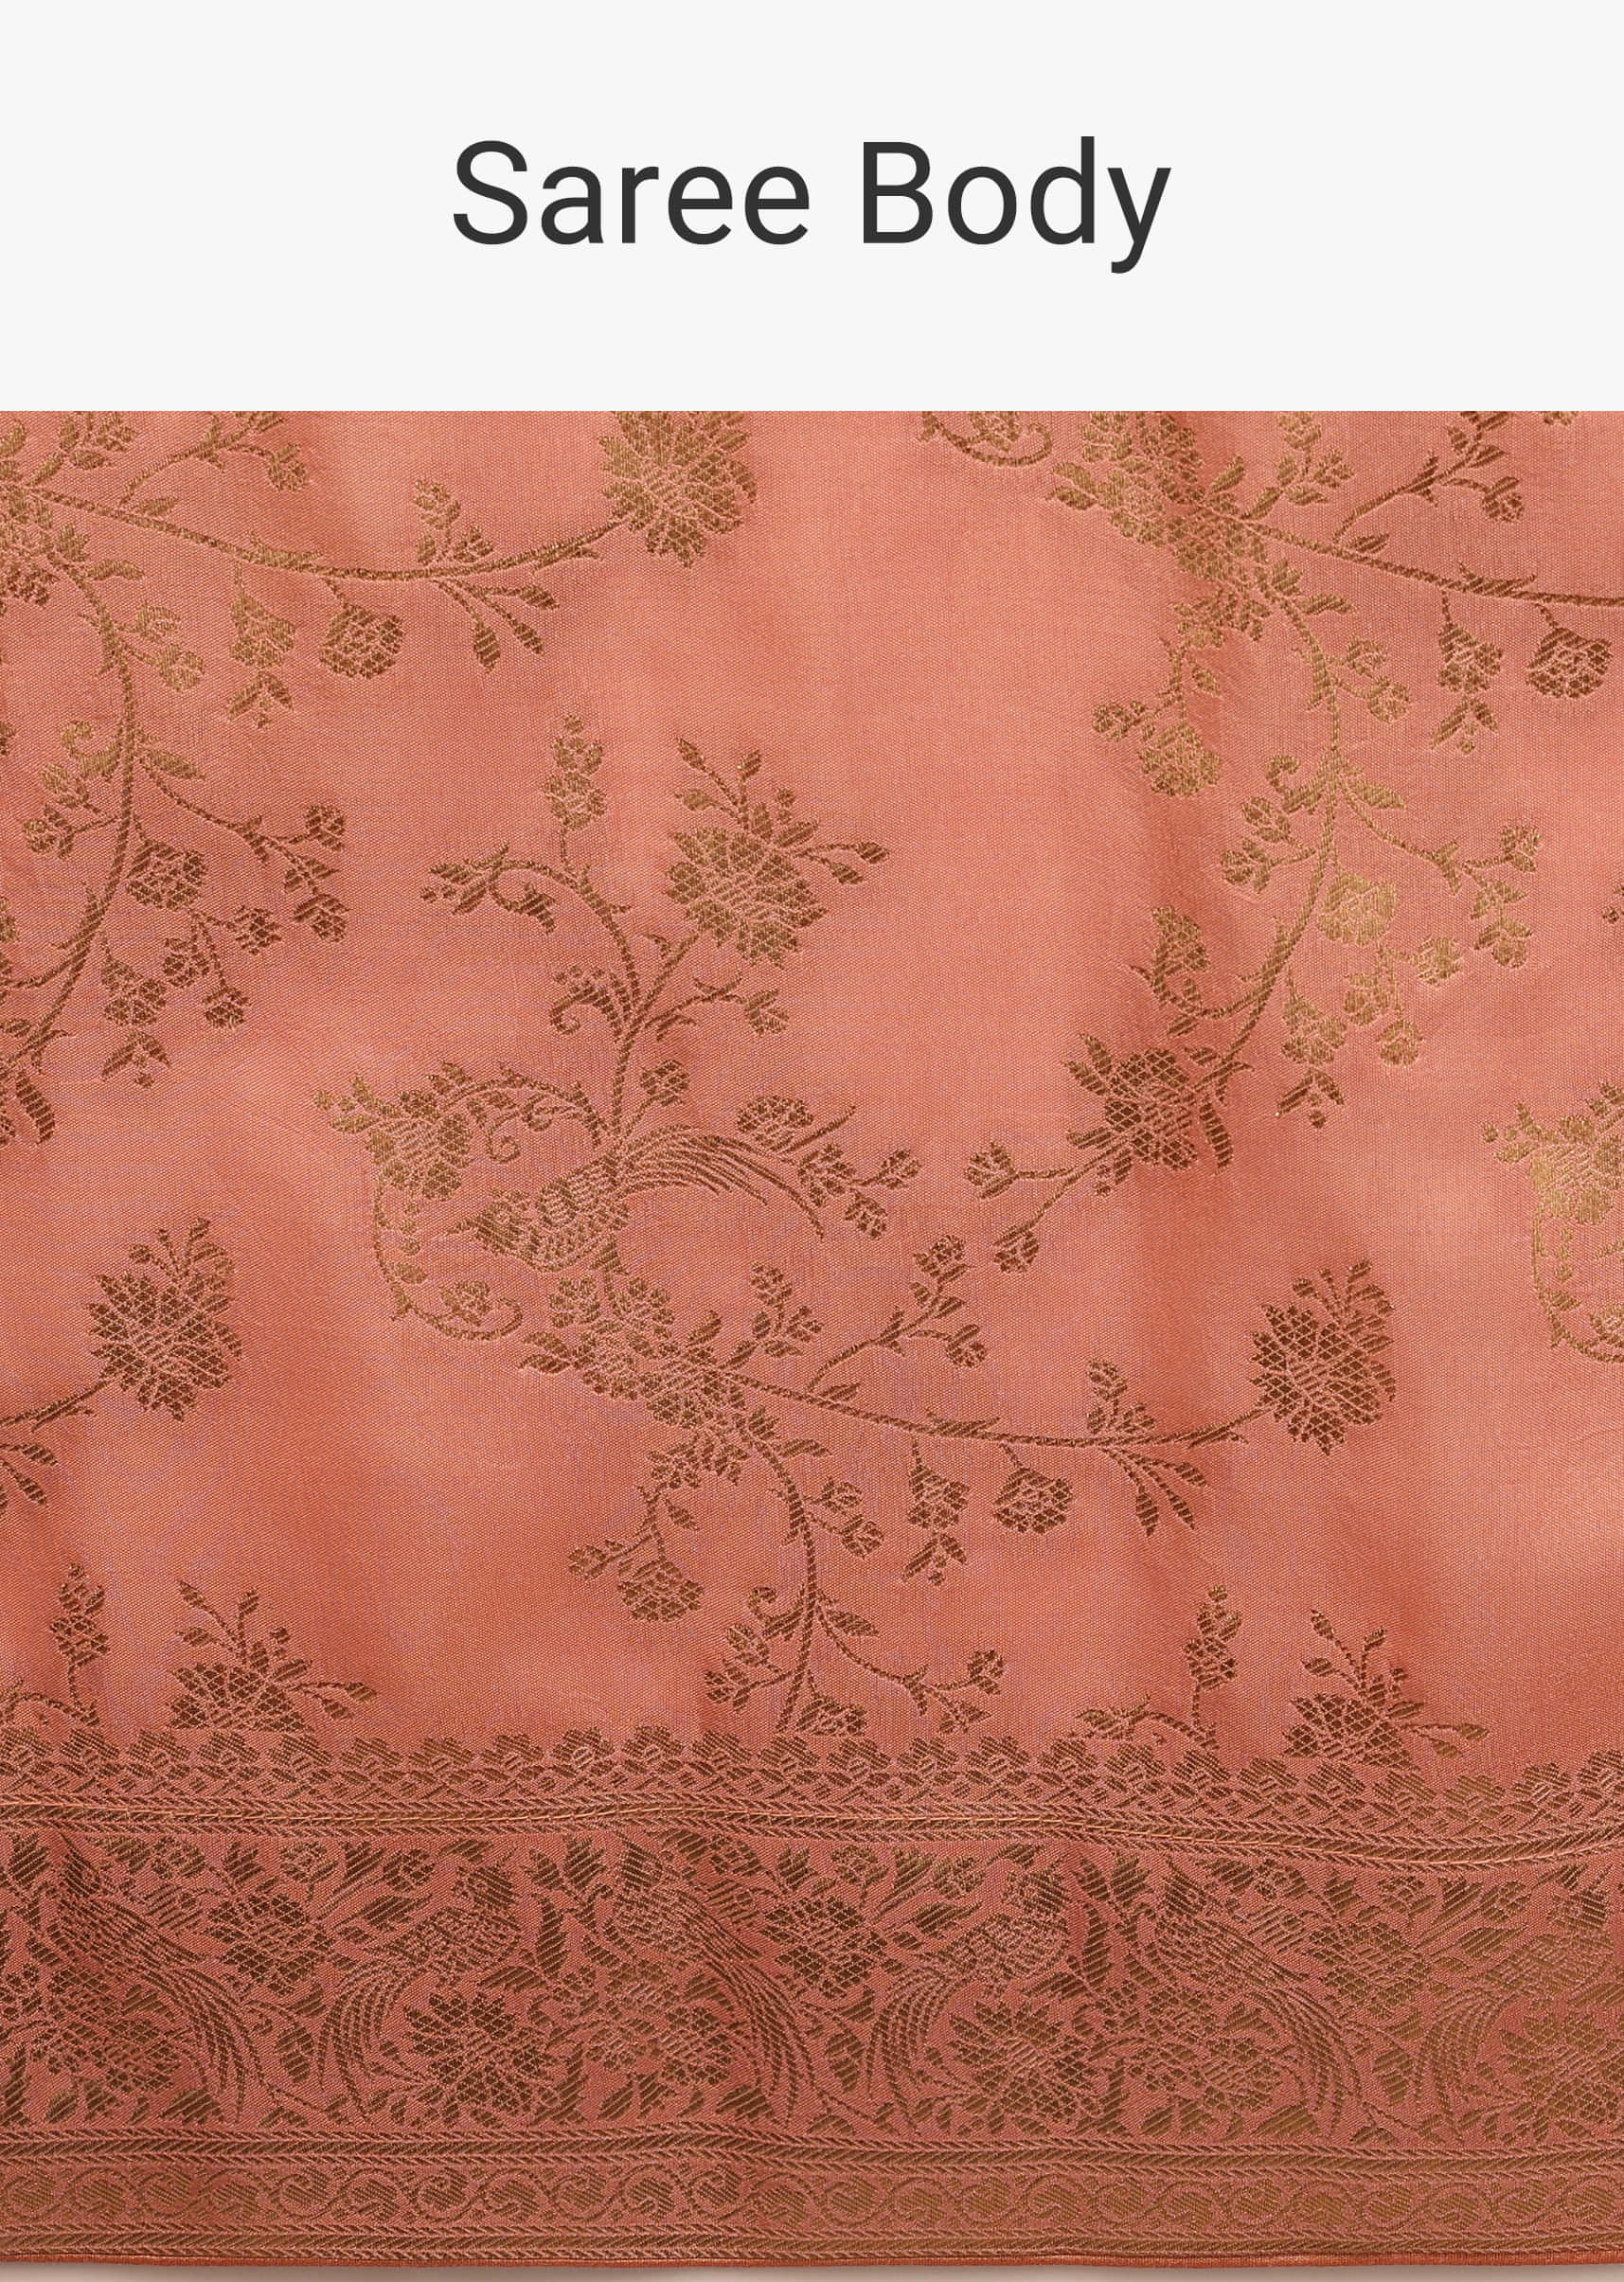 Peach Saree In Dola Silk With Woven Floral Jaal And Intricate Floral Pallu 